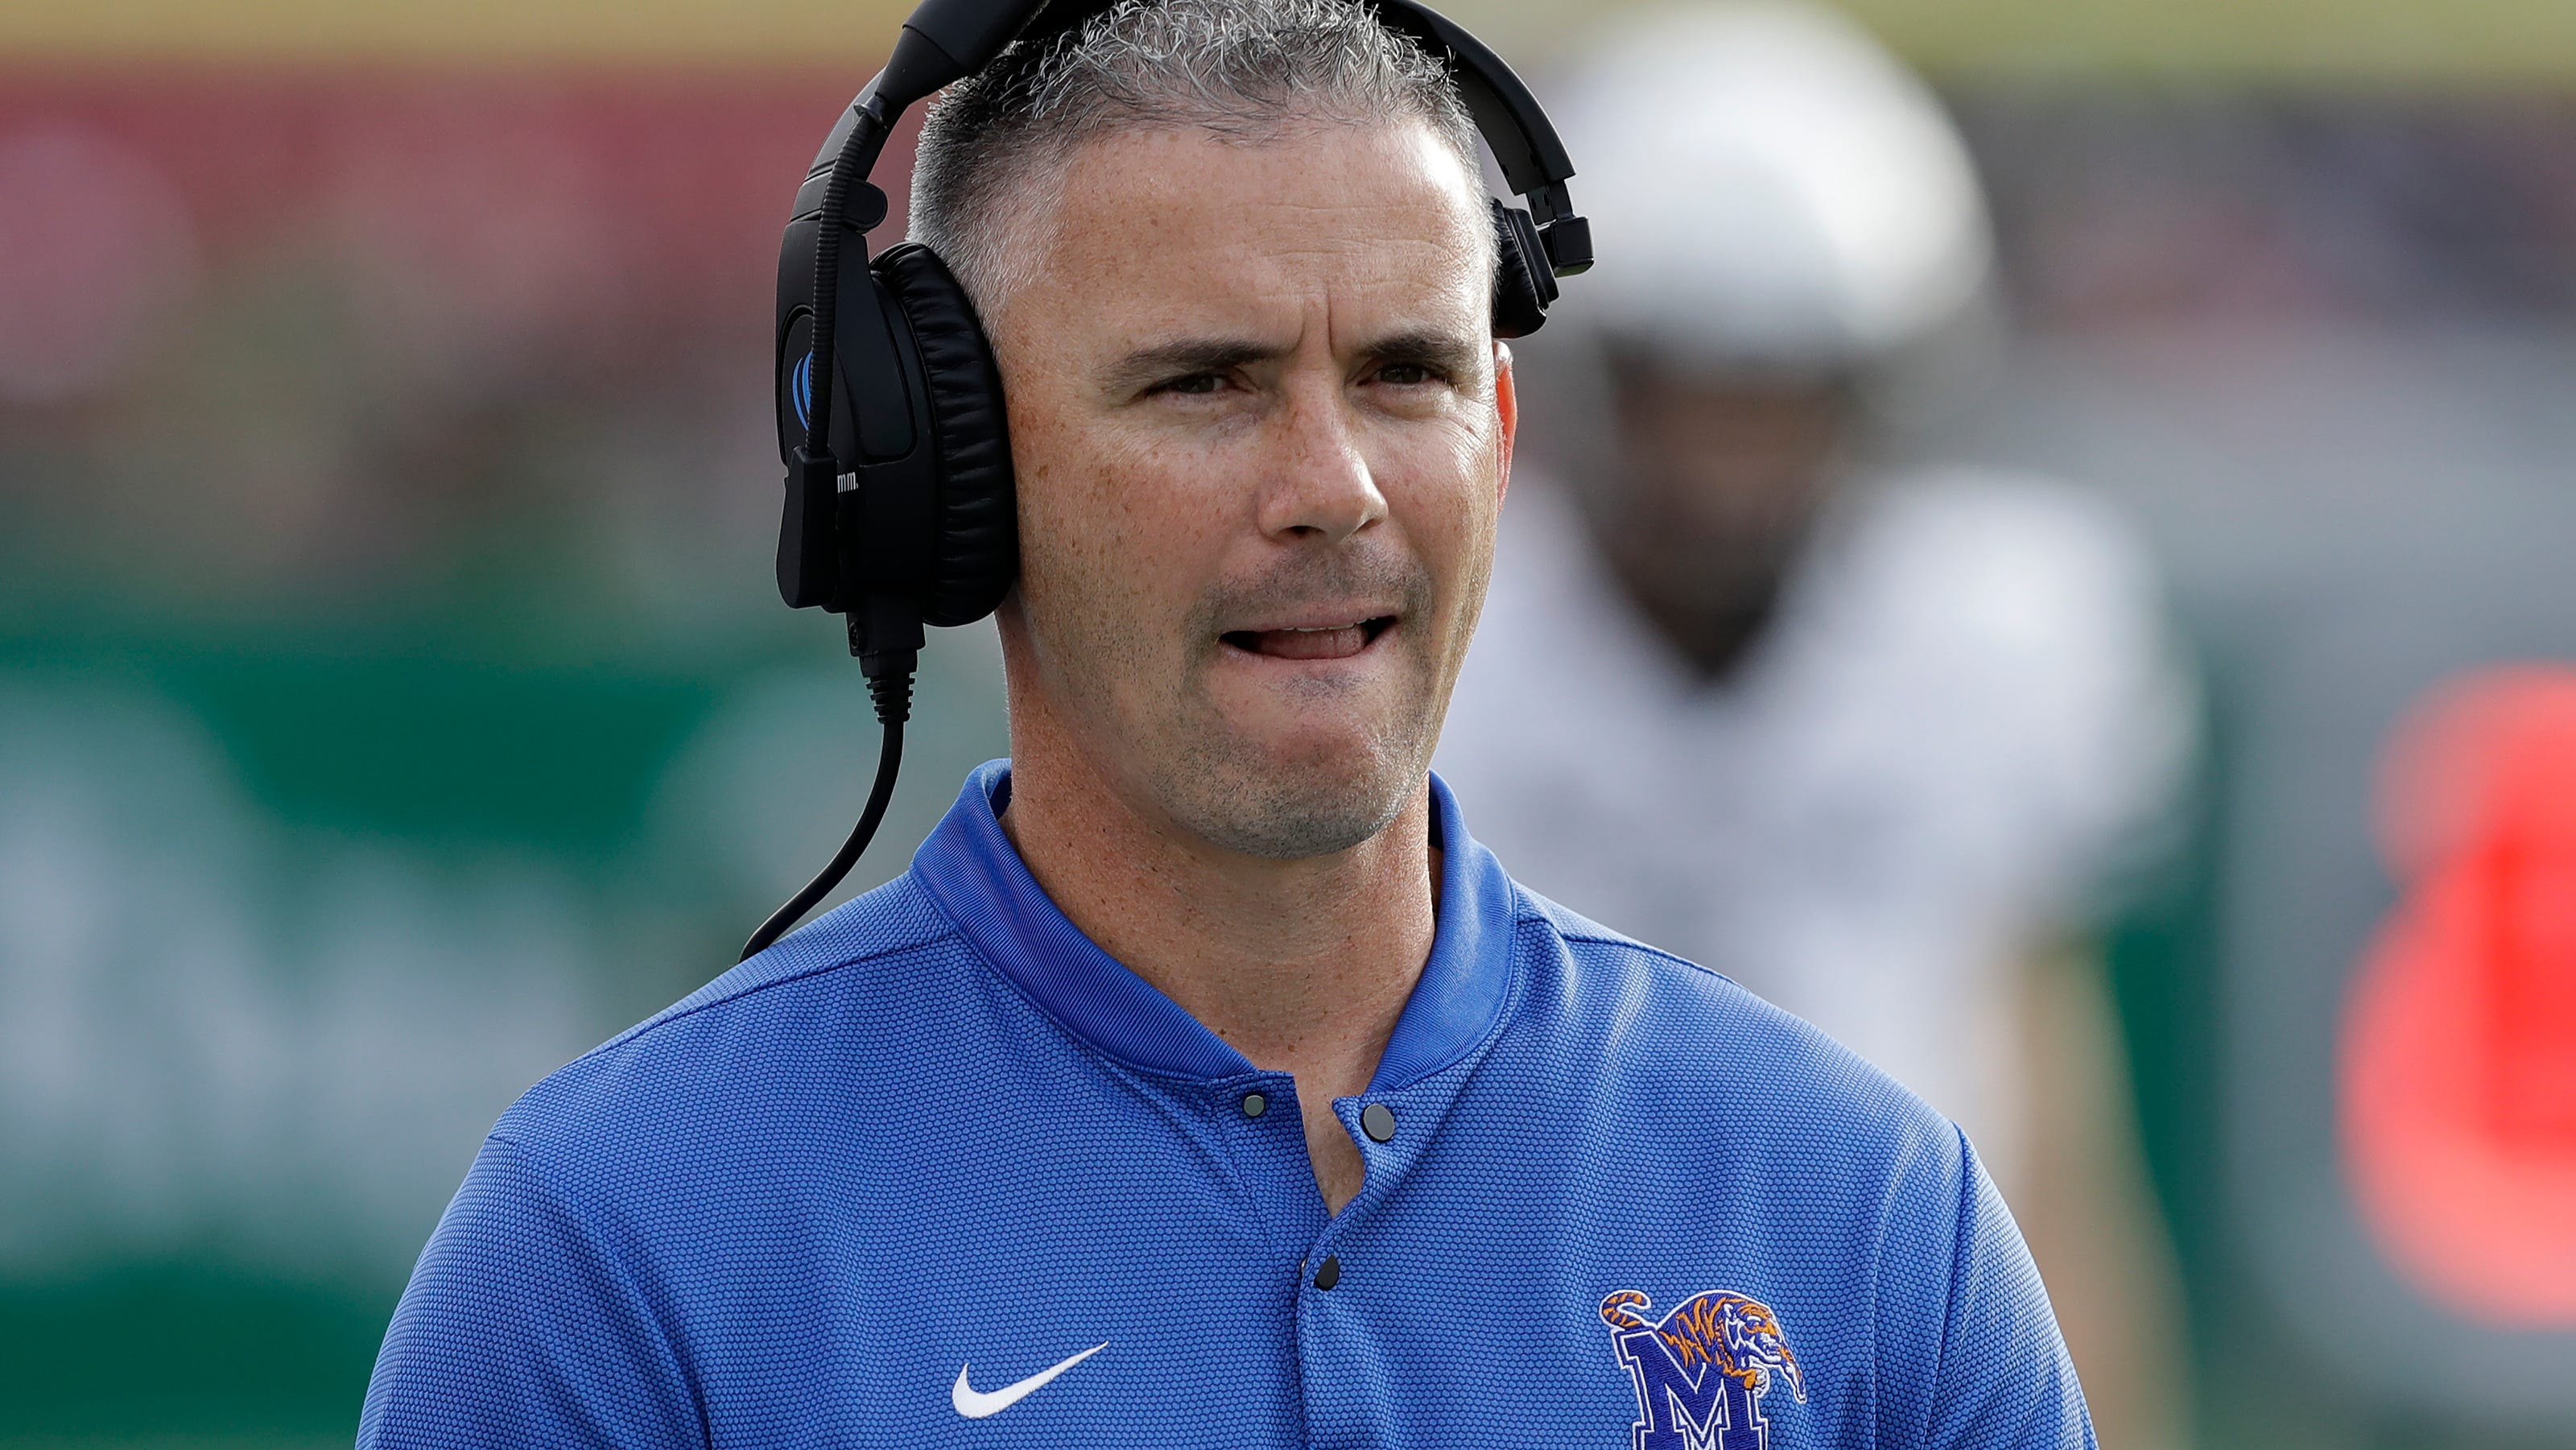 Mike Norvell: 5 things to know about the Memphis football coach